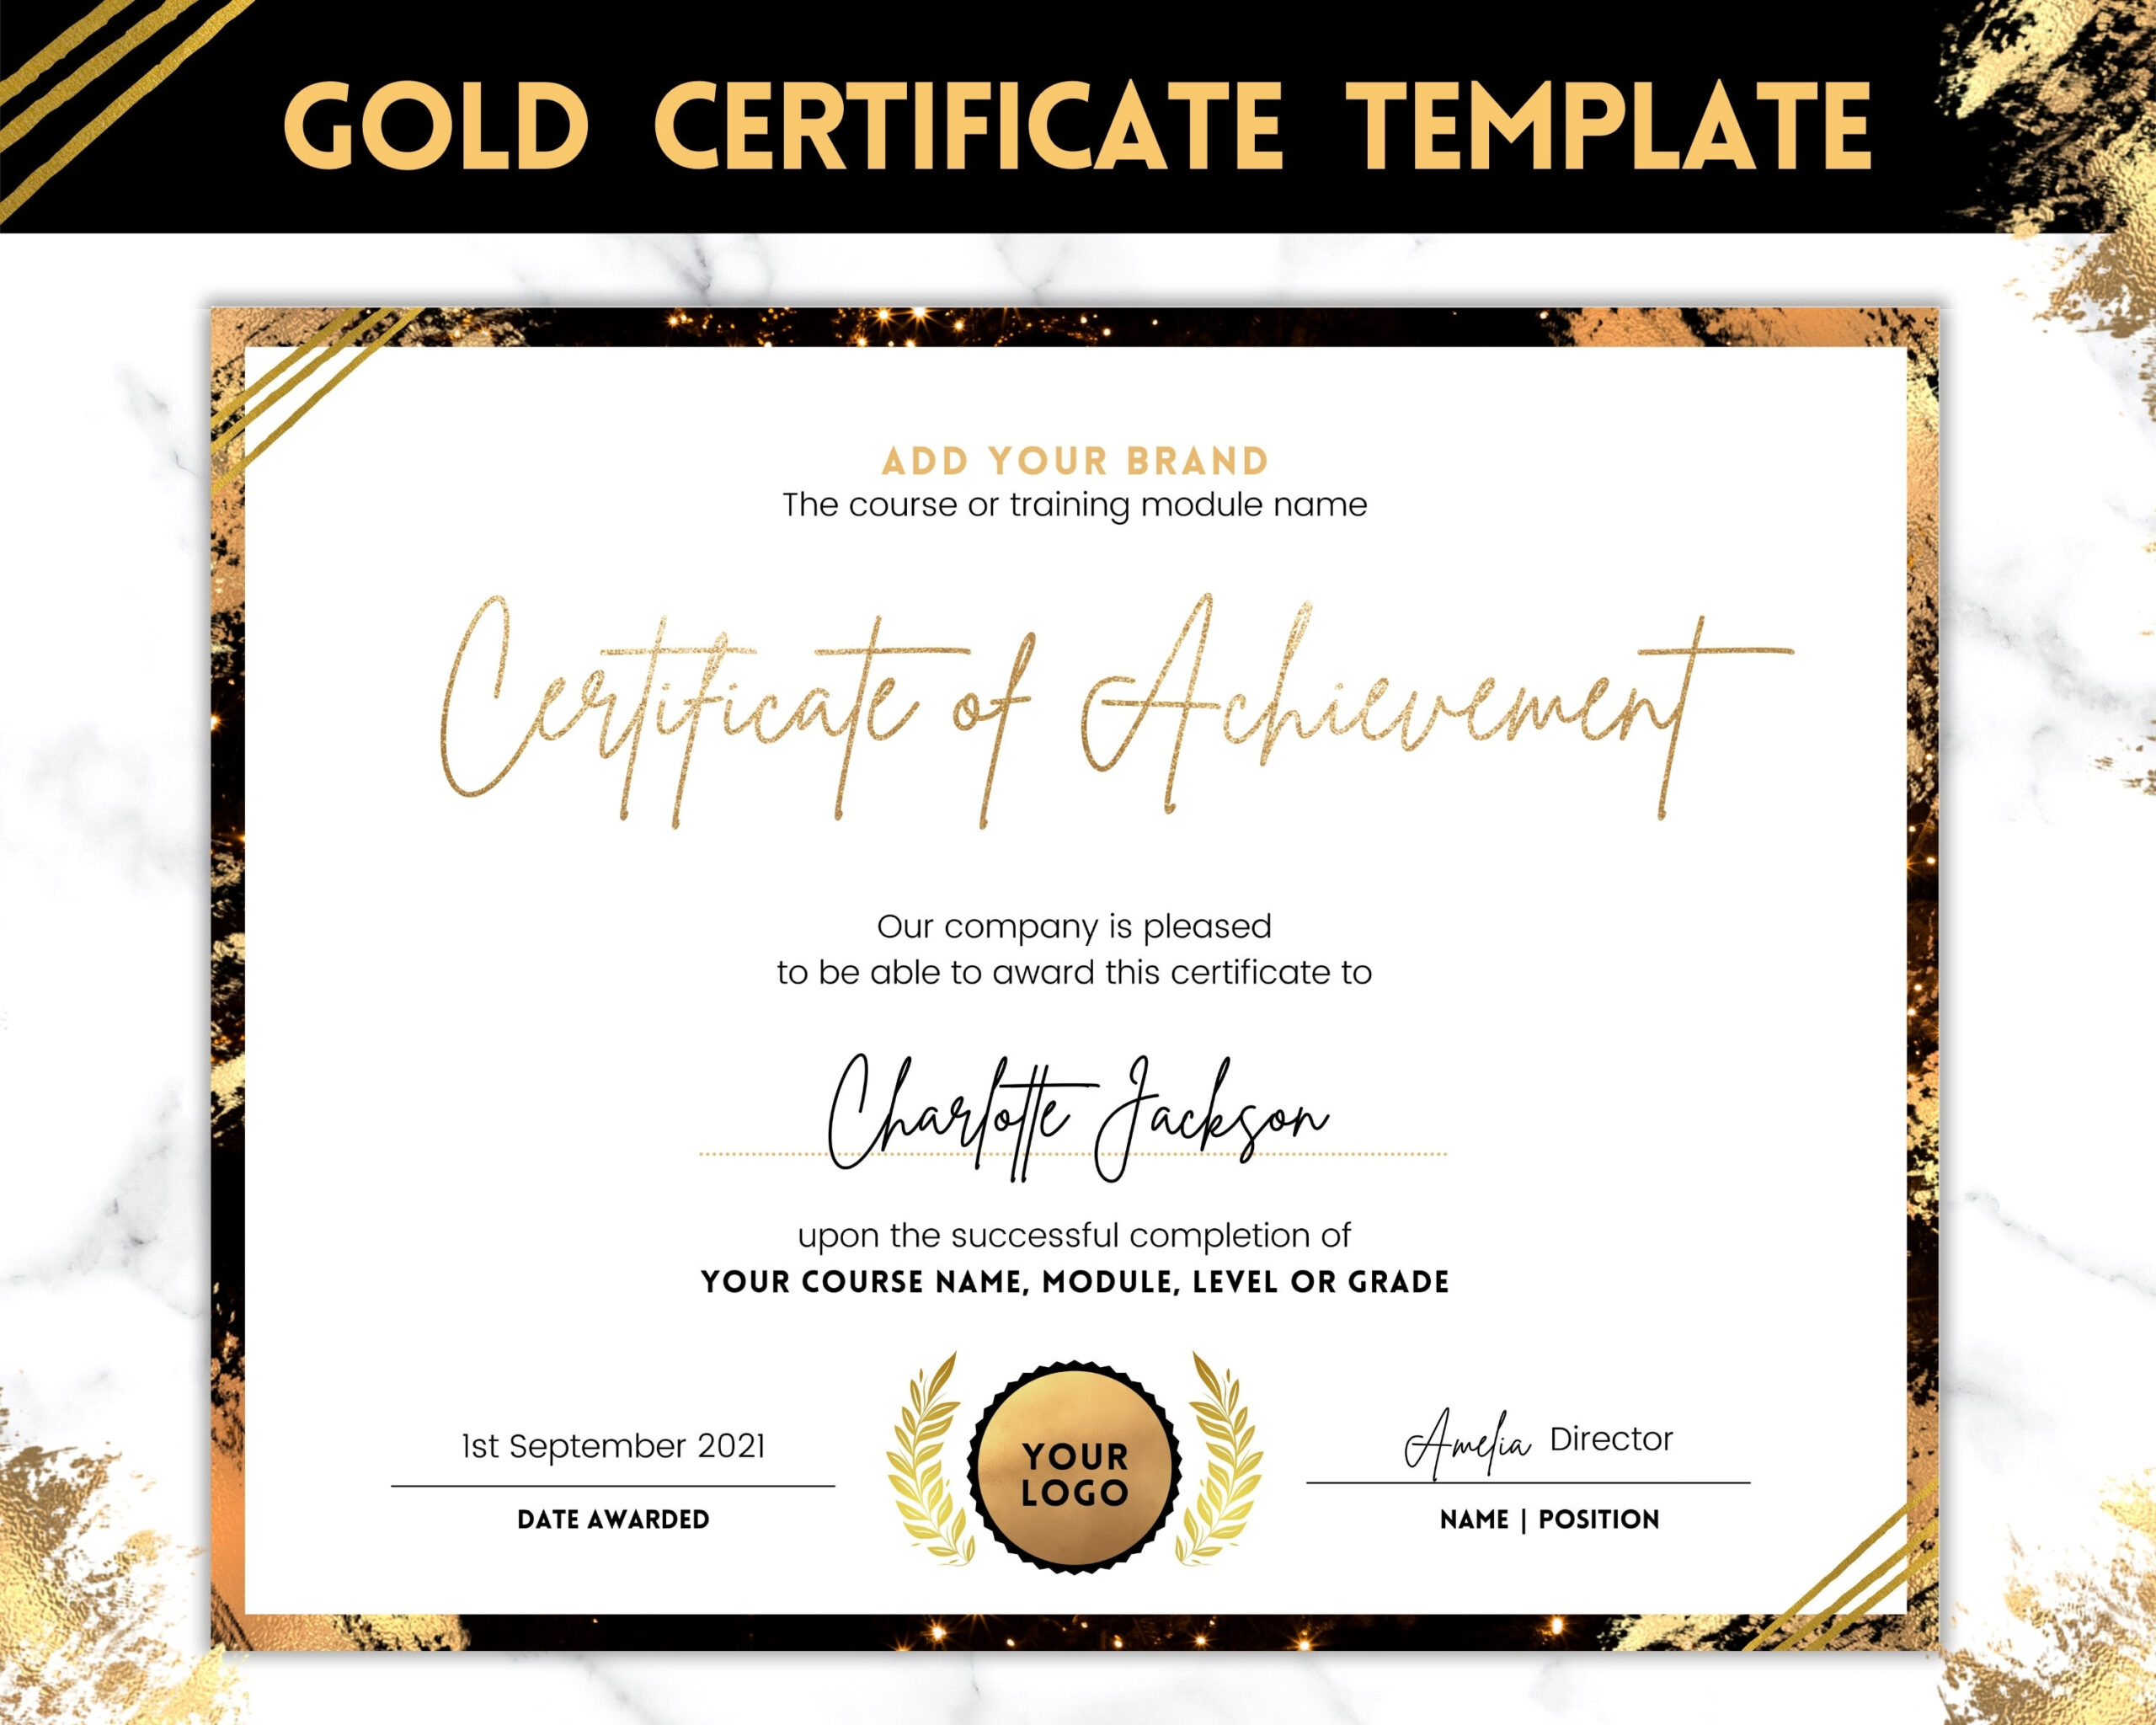 Editable Certificate Template Certificate of Achievement - Etsy